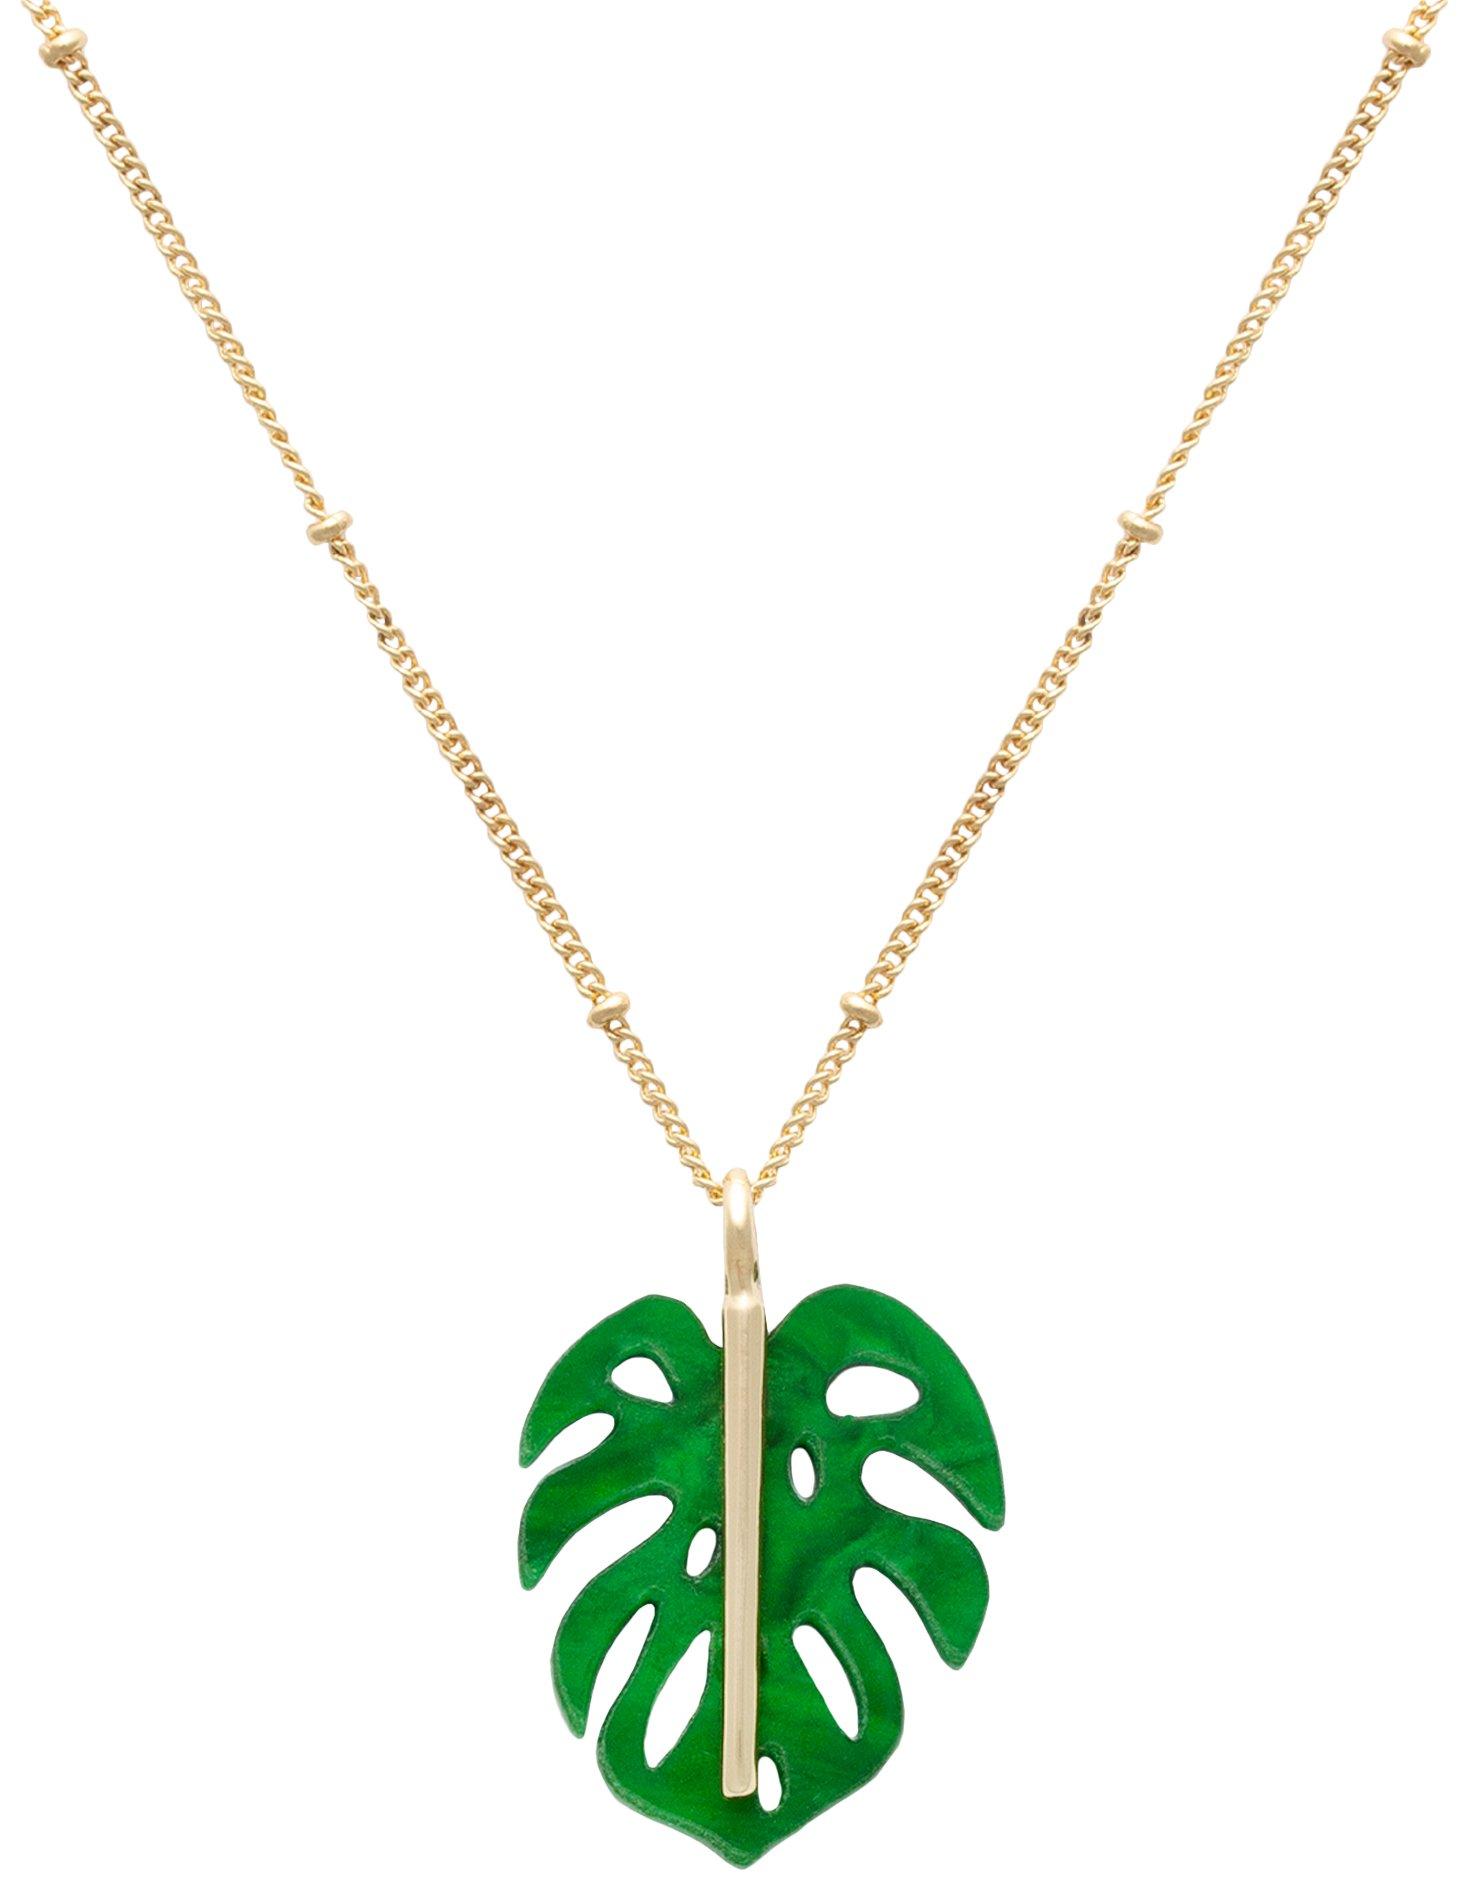 Monstera Leaf Gold Tone Chain Necklace